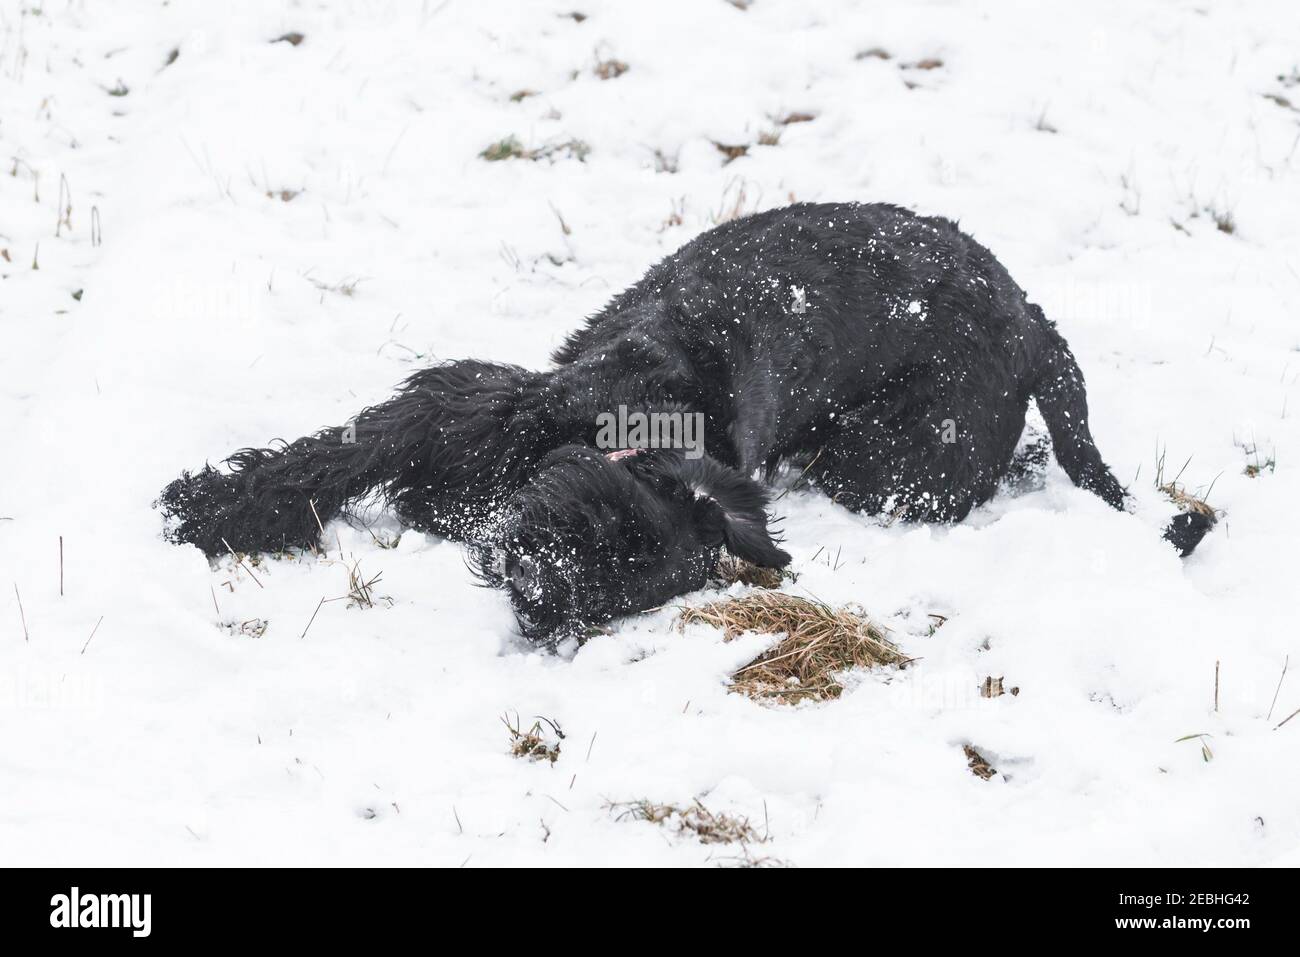 Giant schnauzer dog with black fur playing and rolling in snow in winter and fog weather, Germany Stock Photo